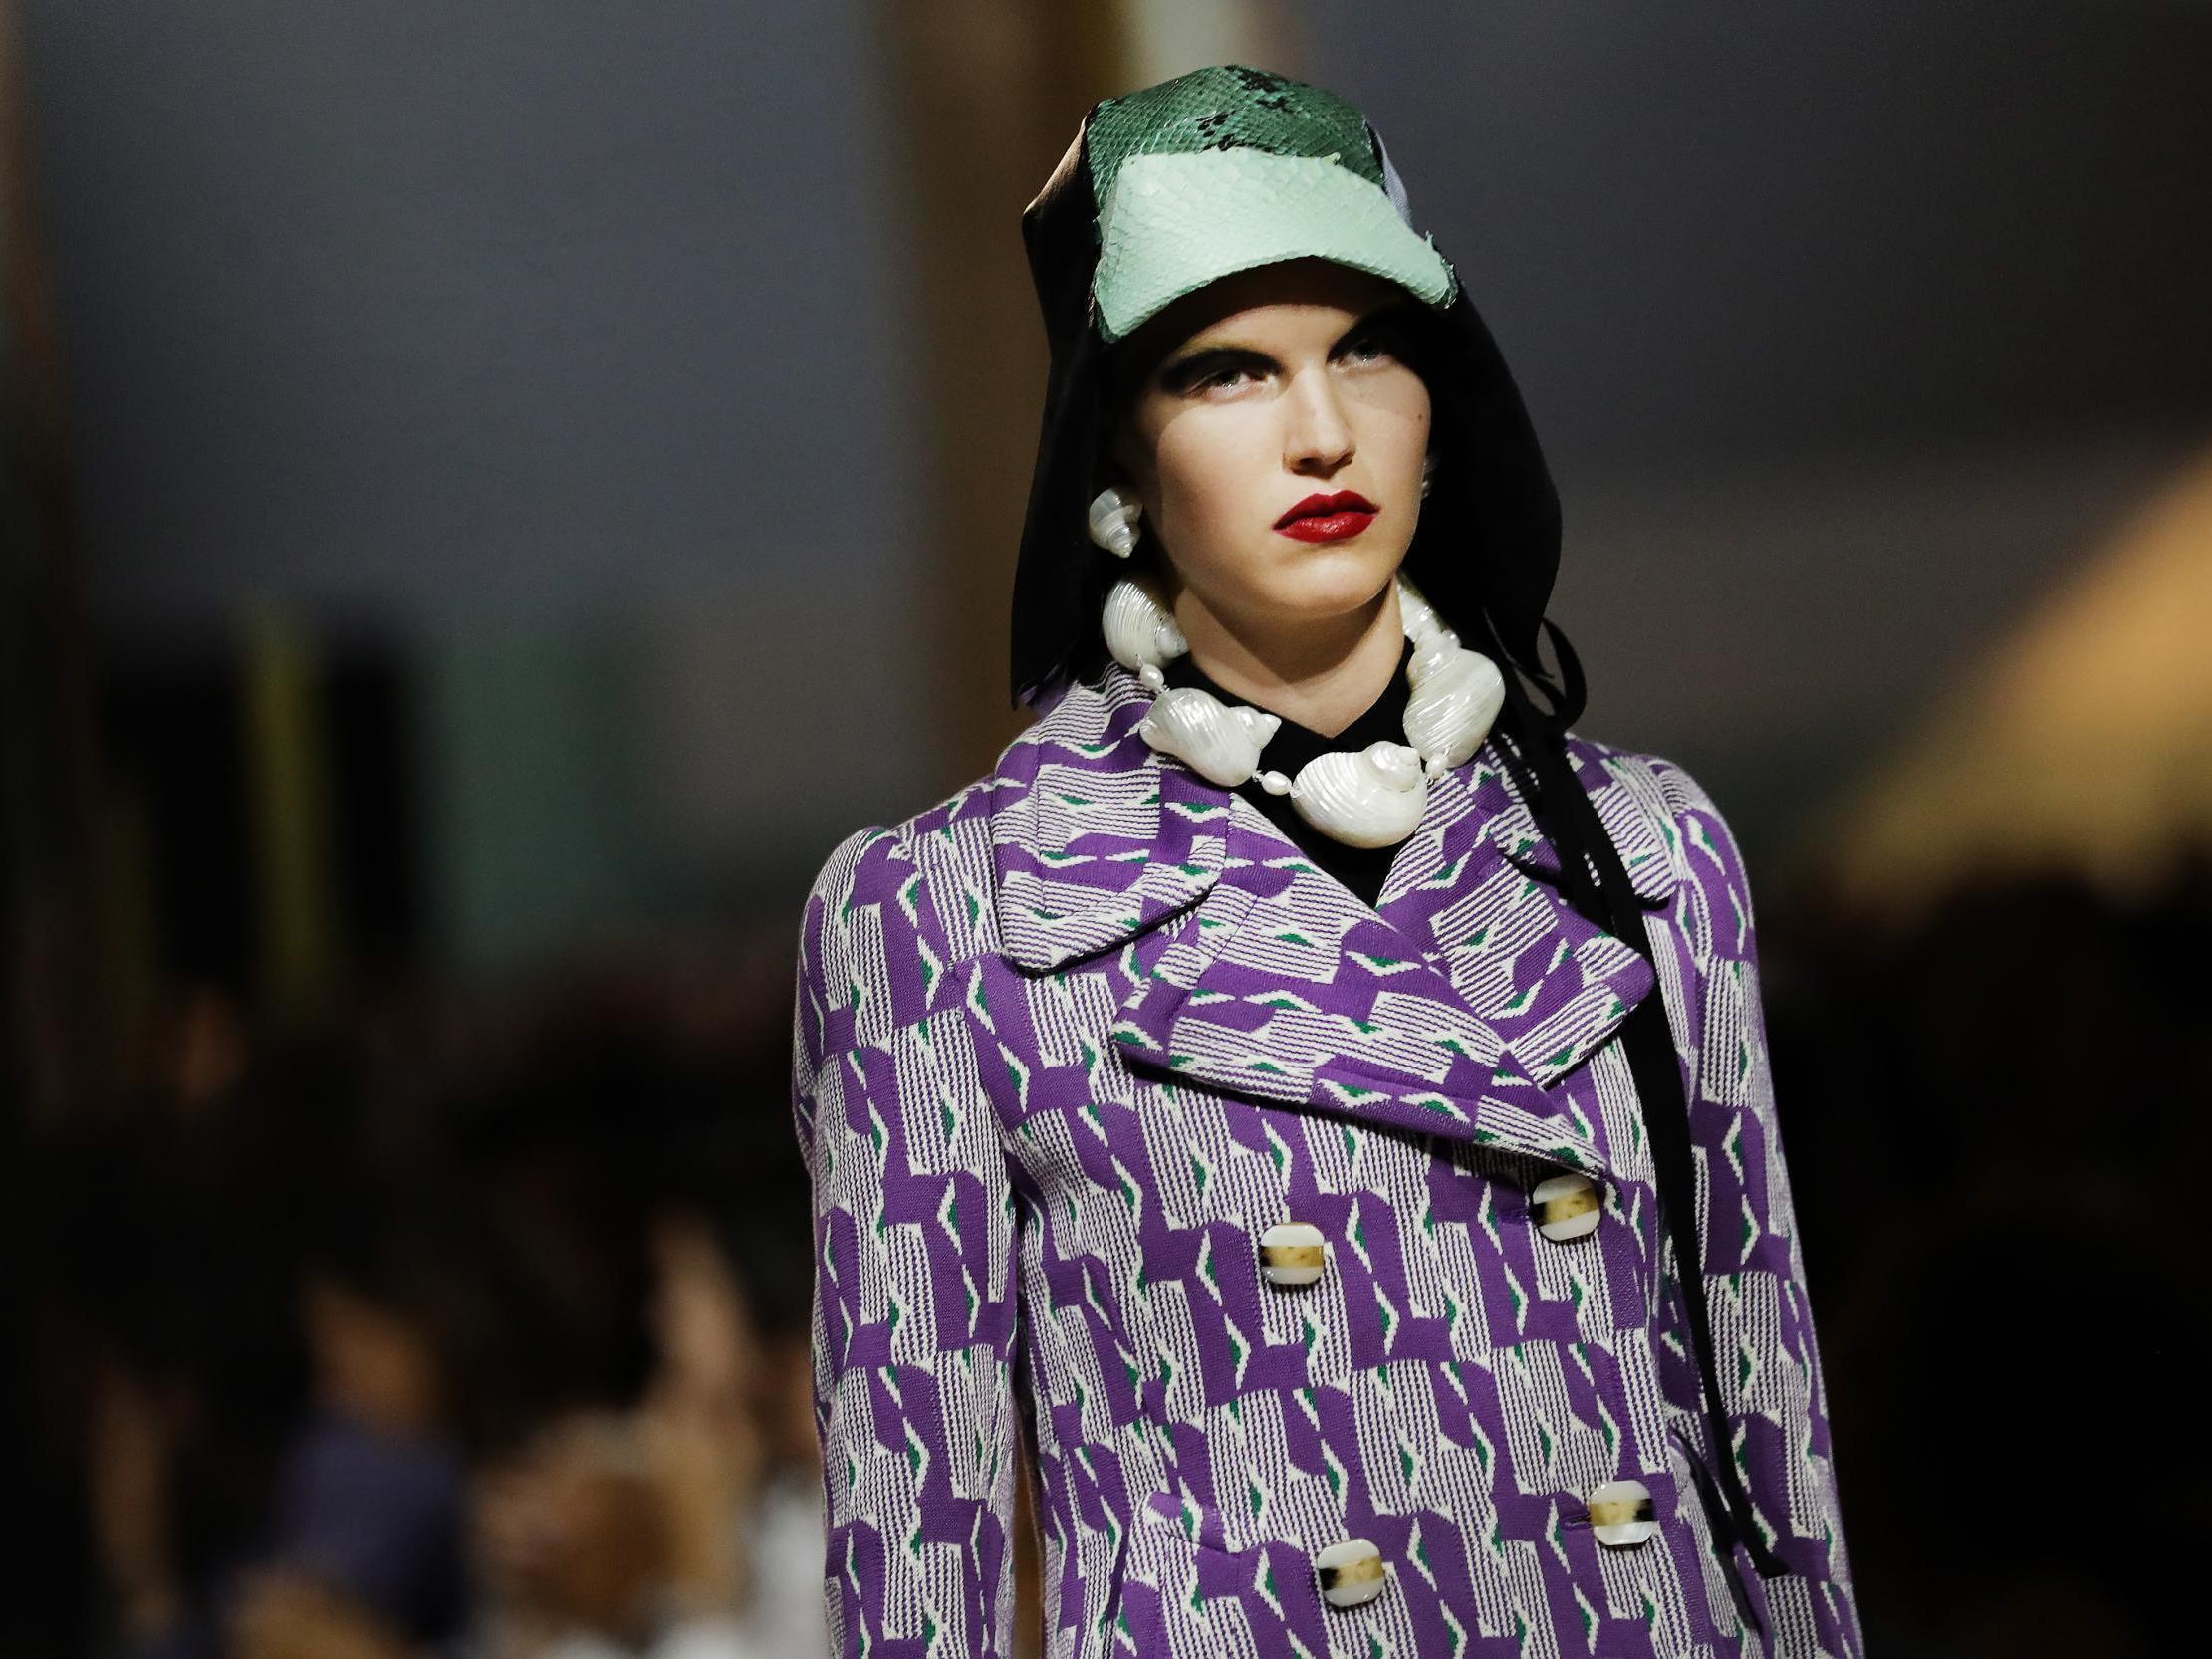 Prada delivered a collection inspired by the fashion industry's excessive waste 